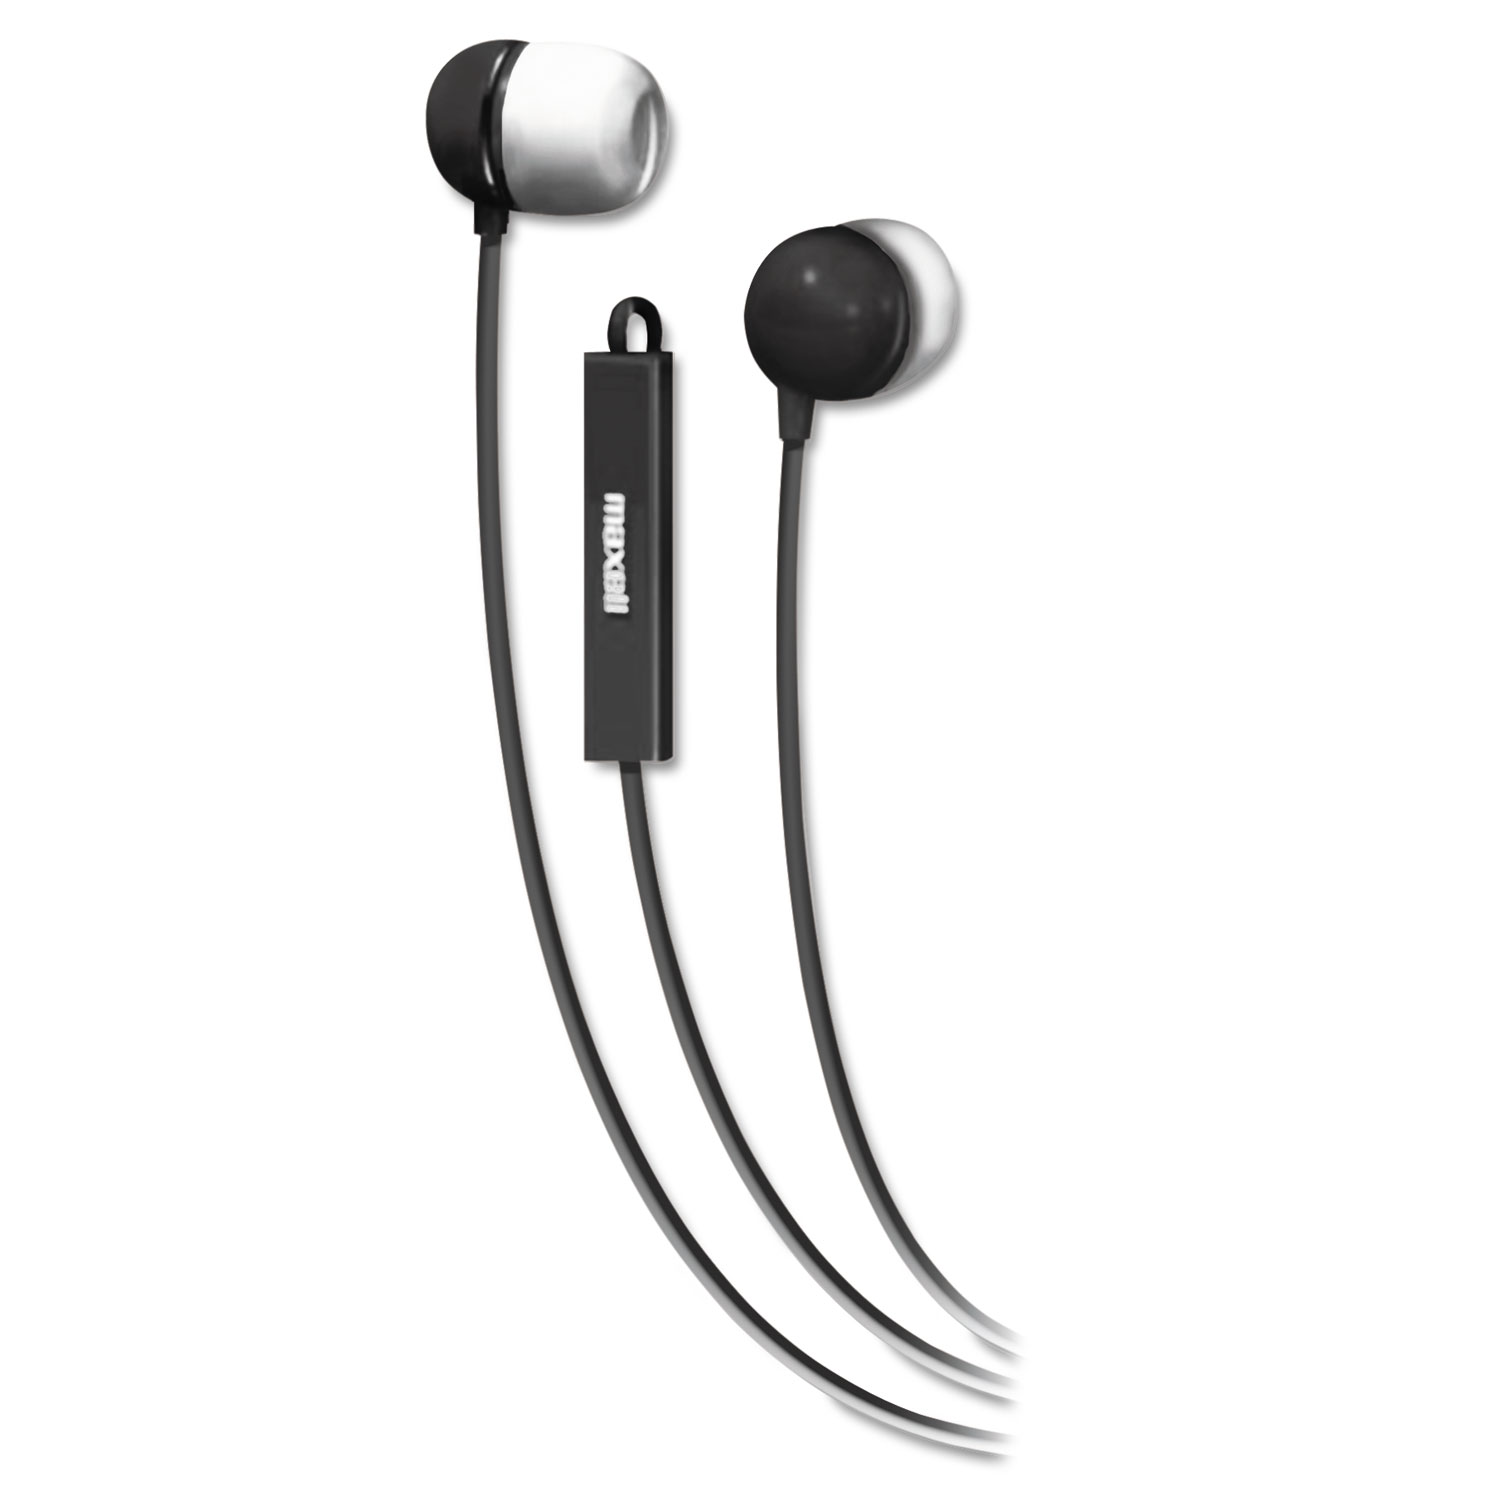  Maxell 190300 In-Ear Buds with Built-in Microphone, Black (MAX190300) 